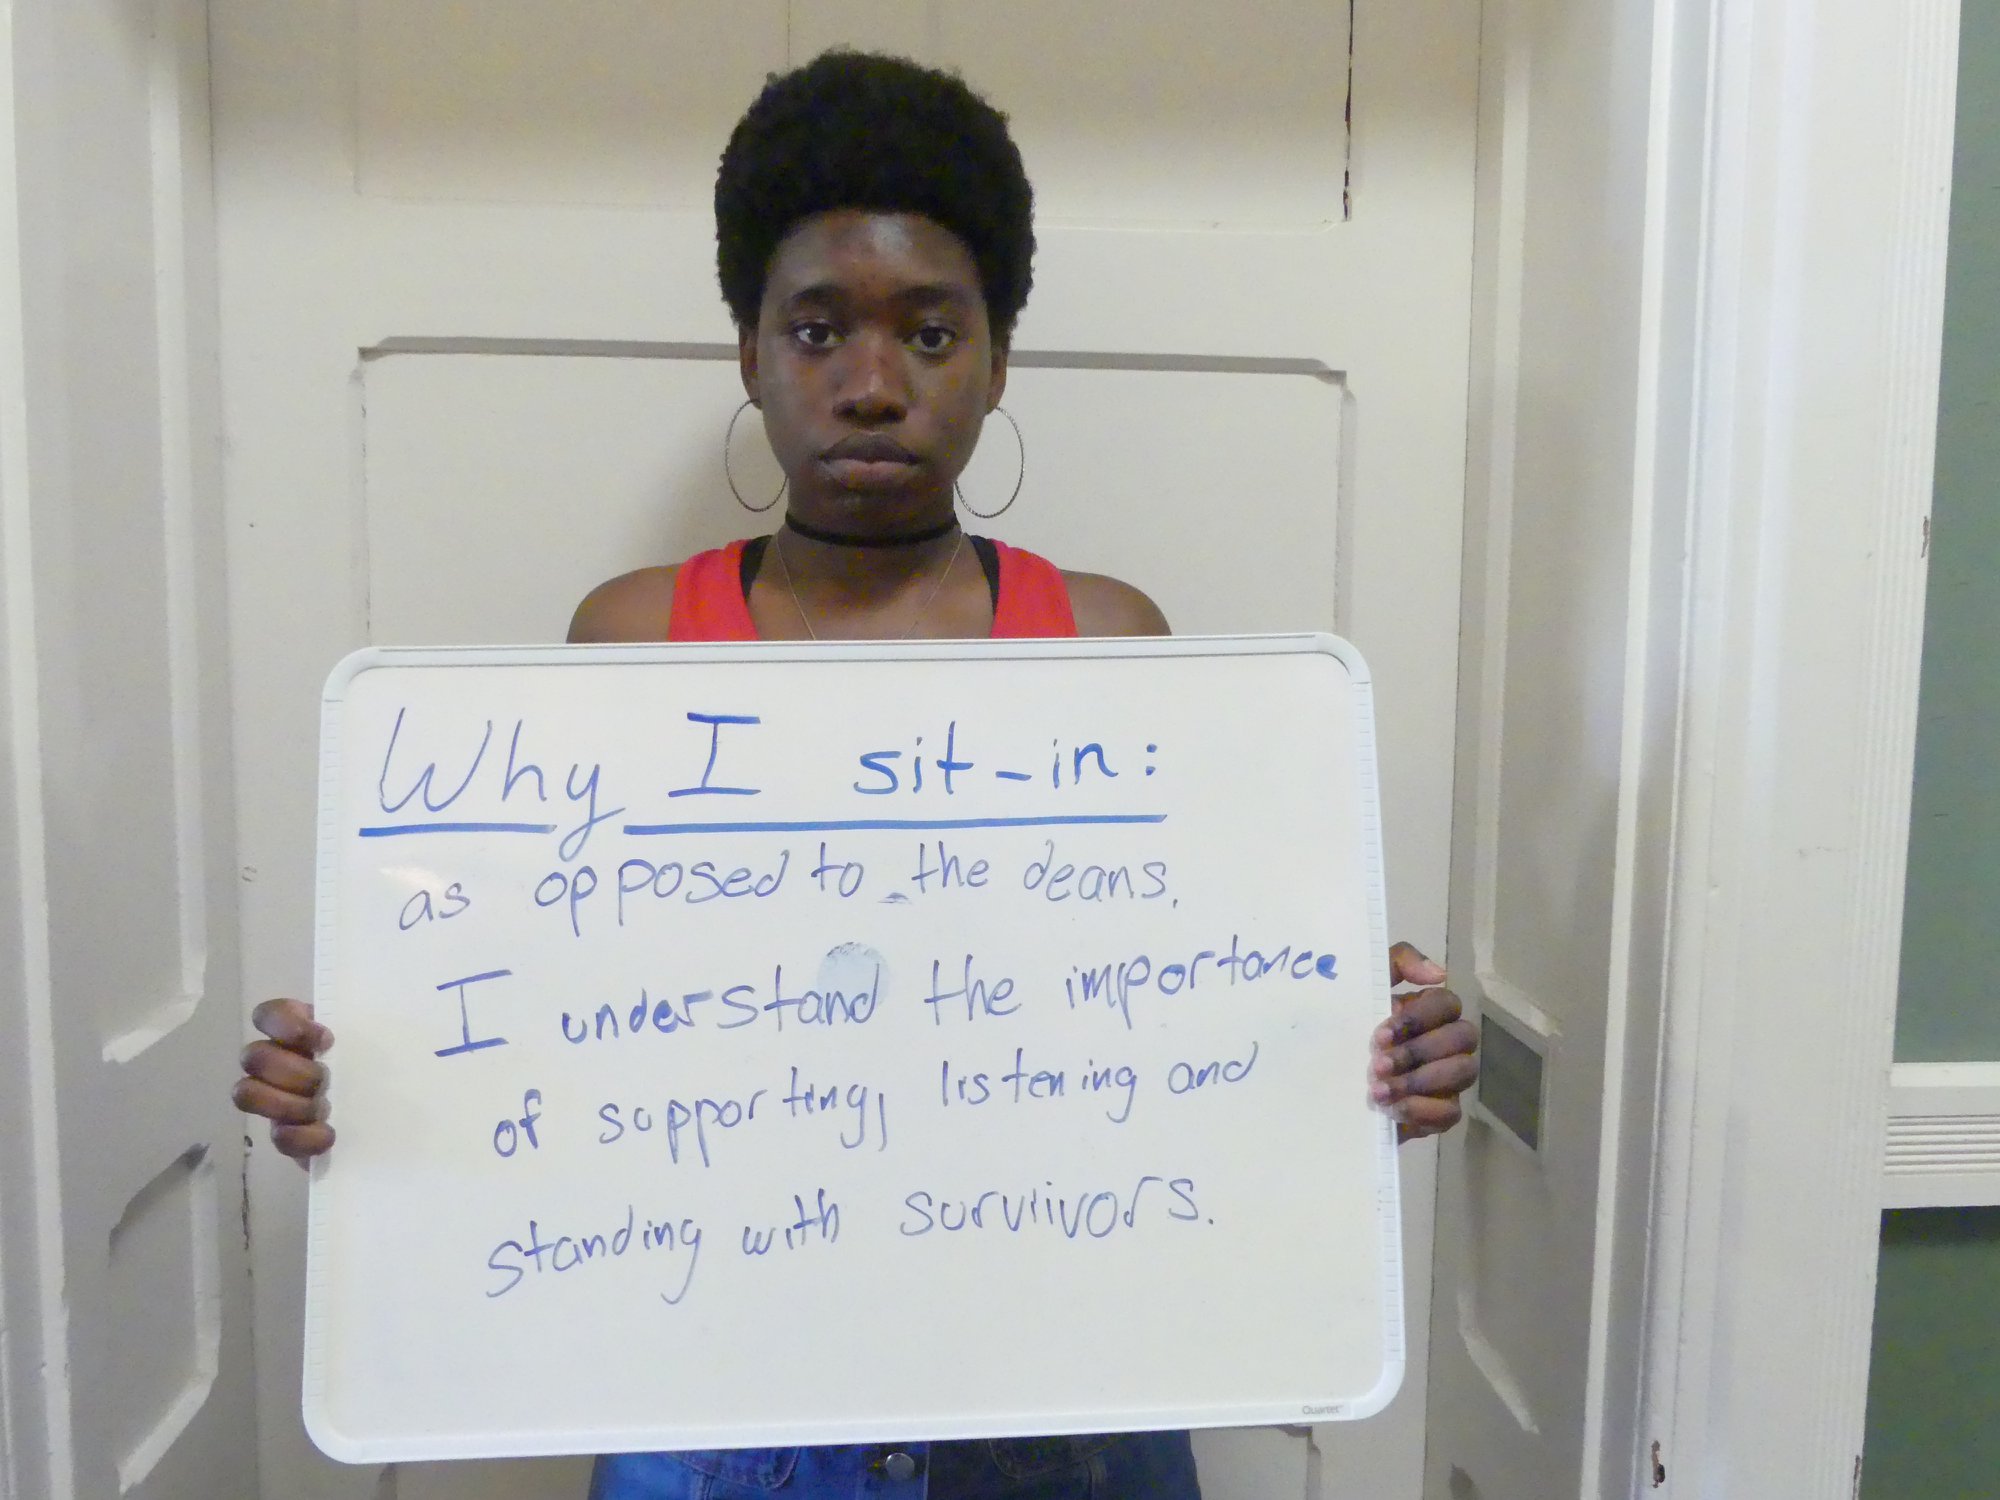 A black woman student holding a sign saying, "Why I sit-in: as opposed to the deans, I understand the importance of supporting, listening and standing with survivors."